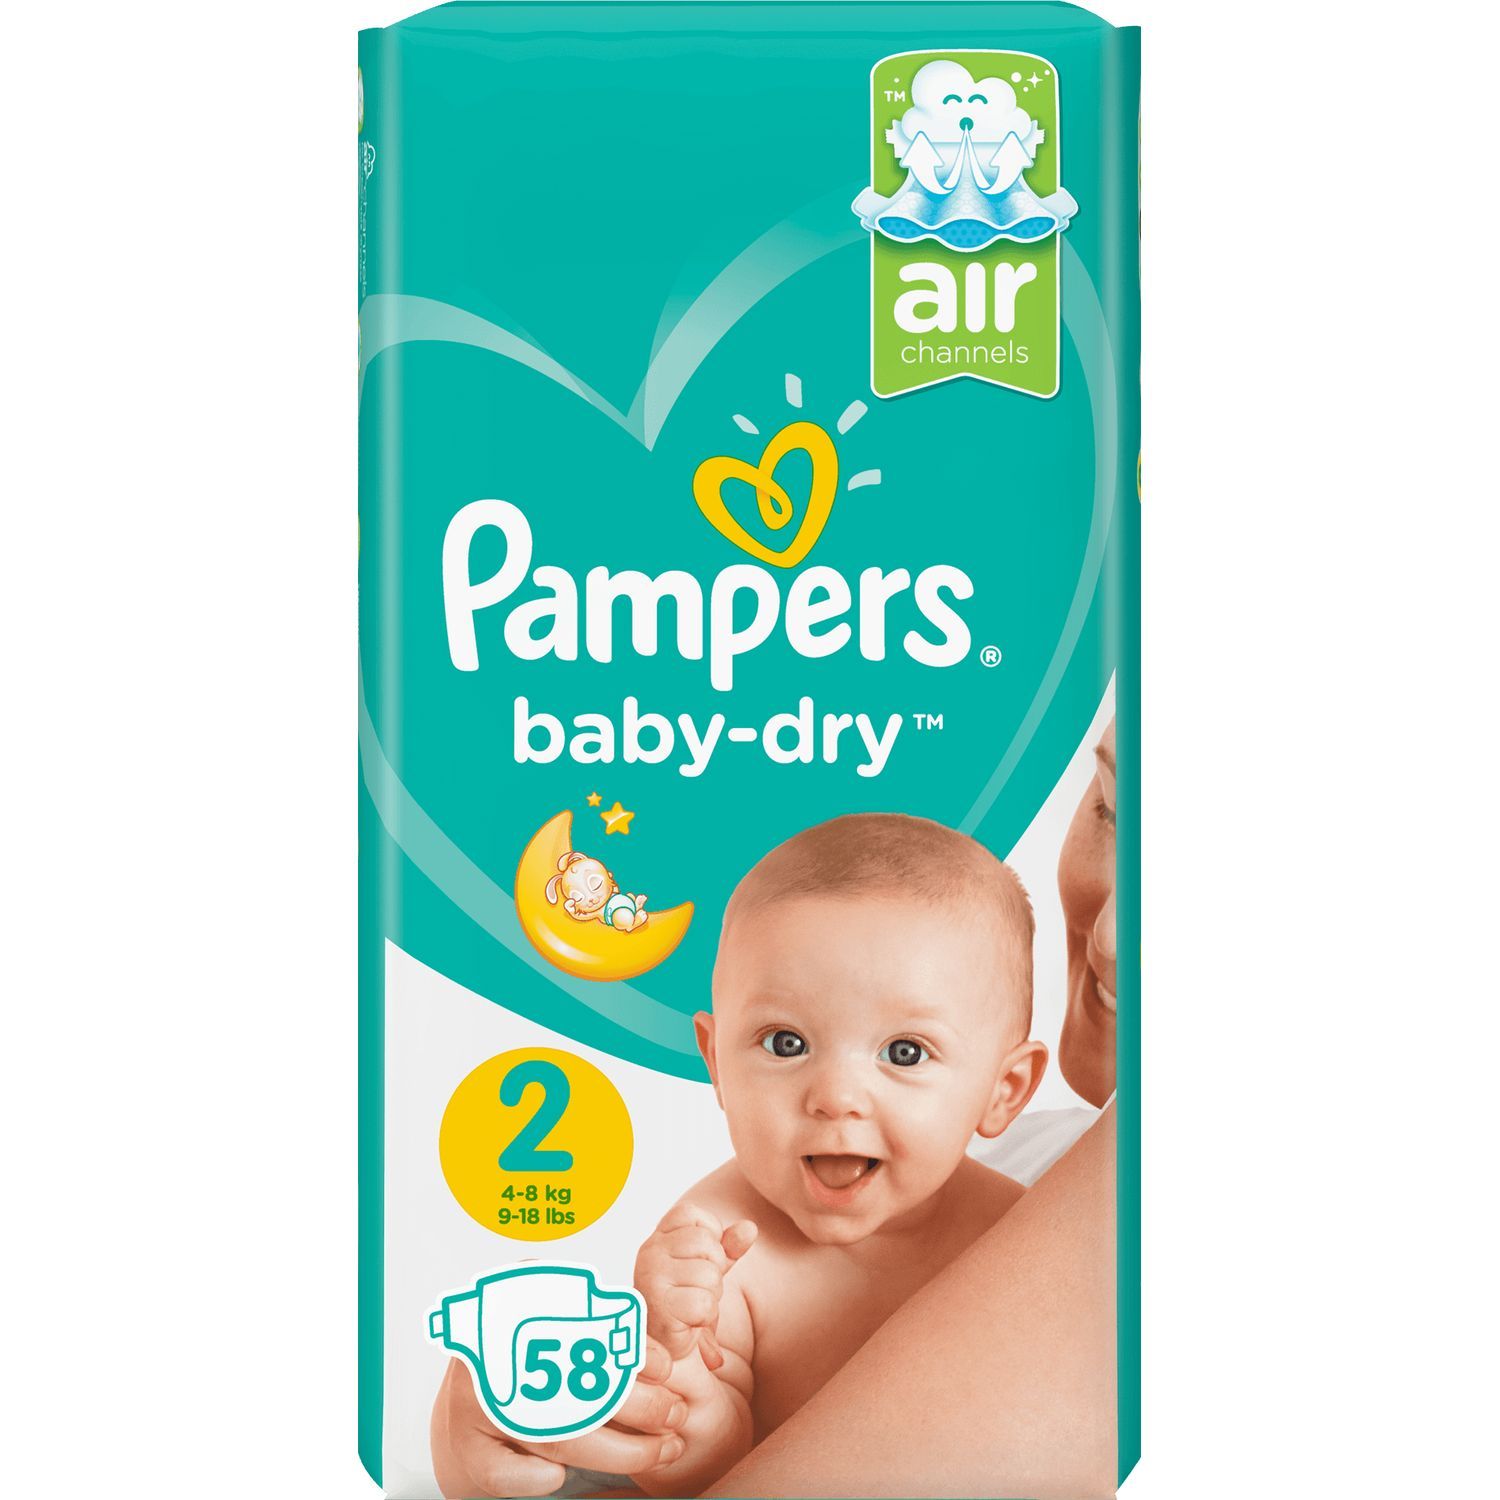 148 COUCHES PAMPERS BABY DRY Taille 2 (4 - 8 kg) NEUF